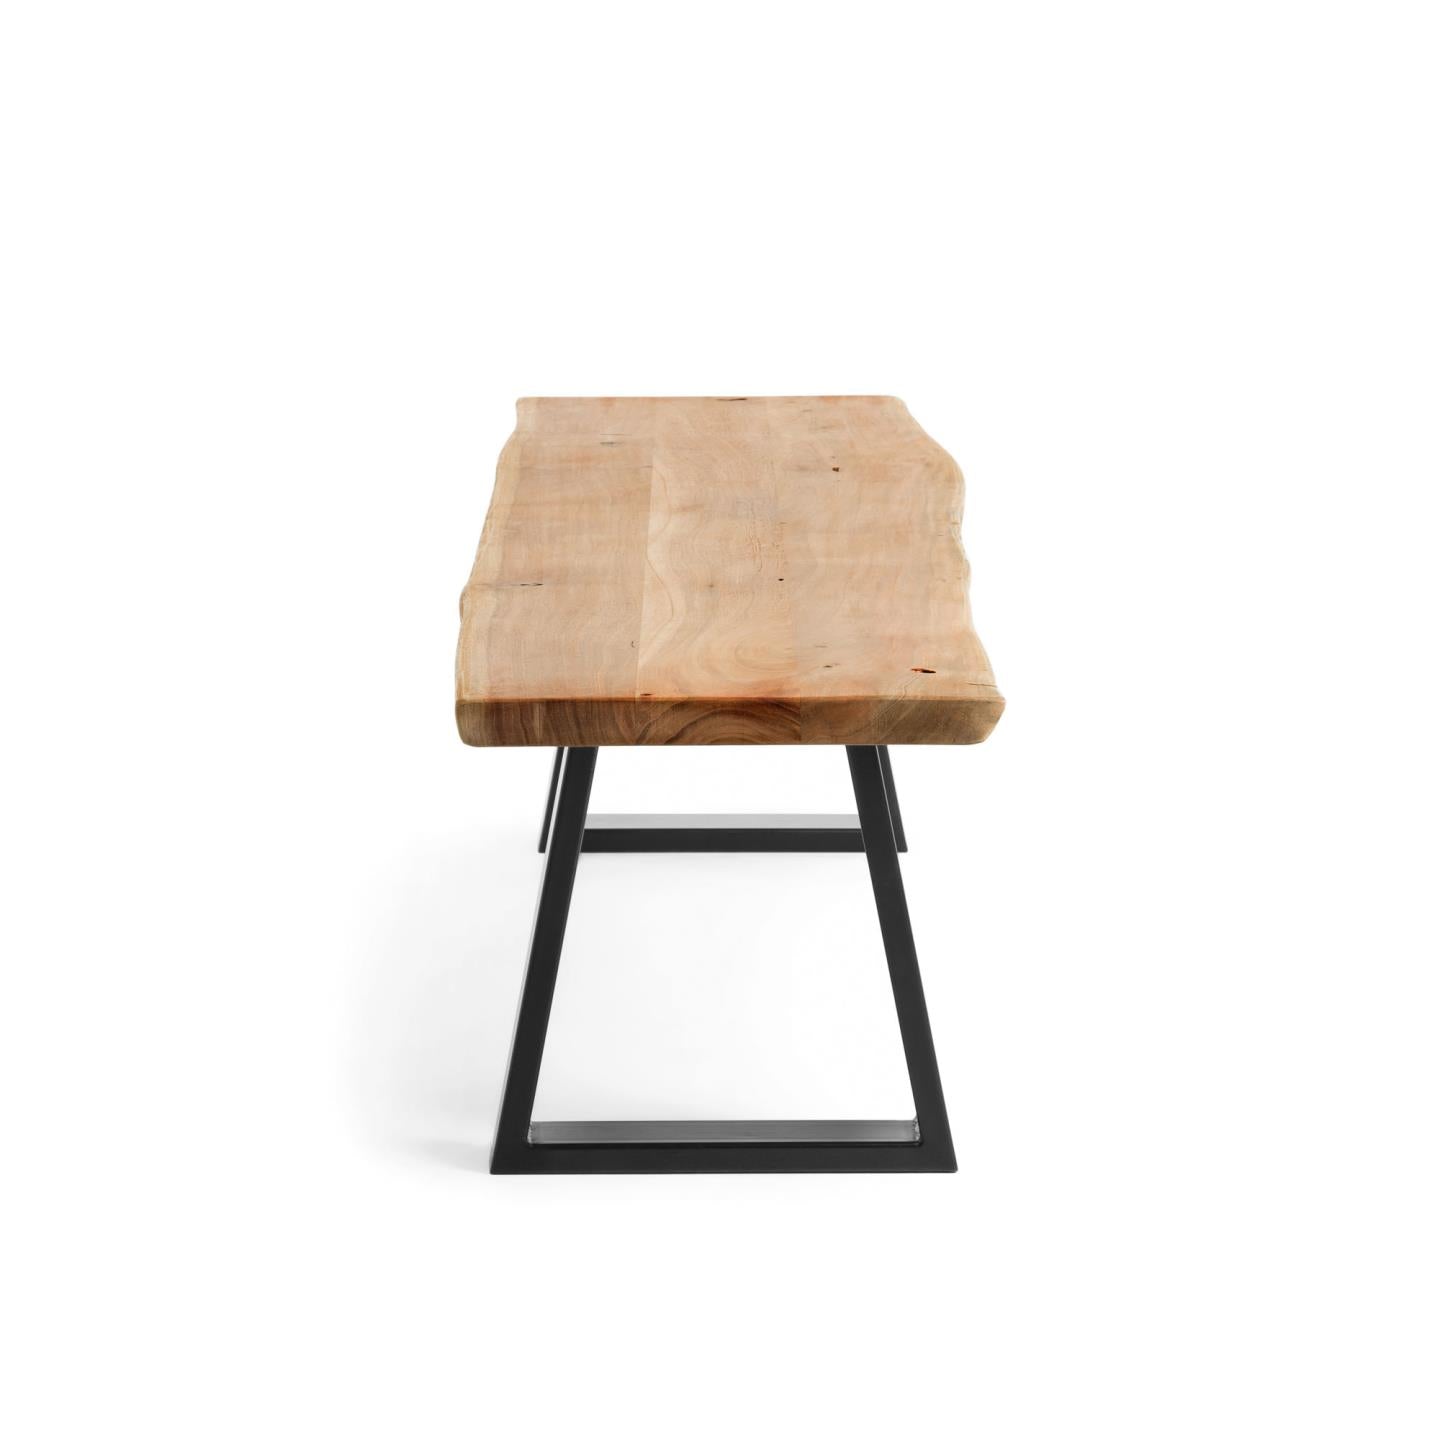 Alaia bench in solid acacia wood with black steel legs, 160 cm